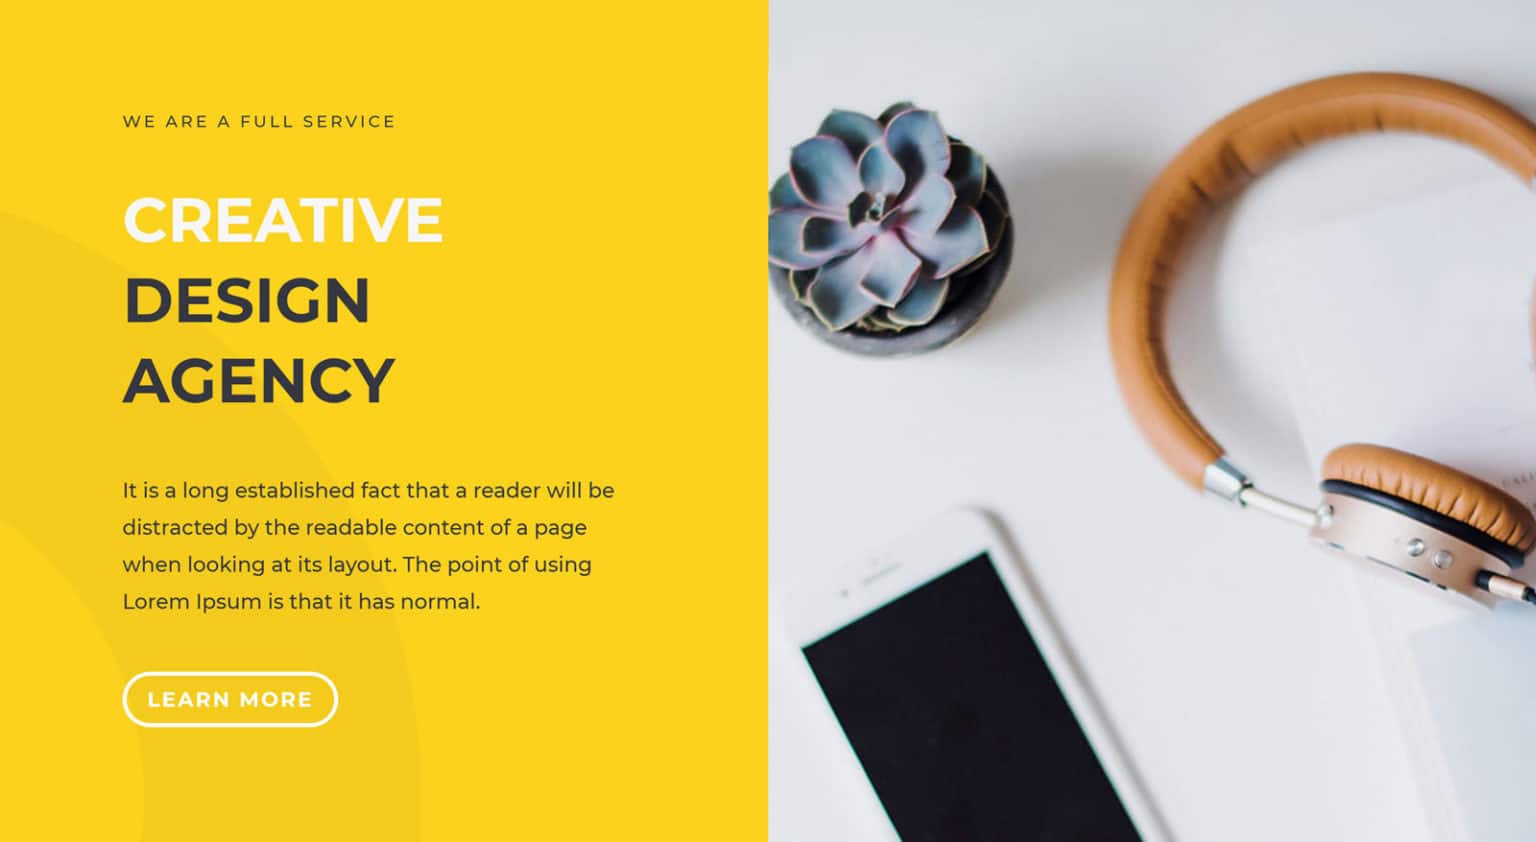 Divi theme review - wordpress design and theme elegant themes with website builder - design example